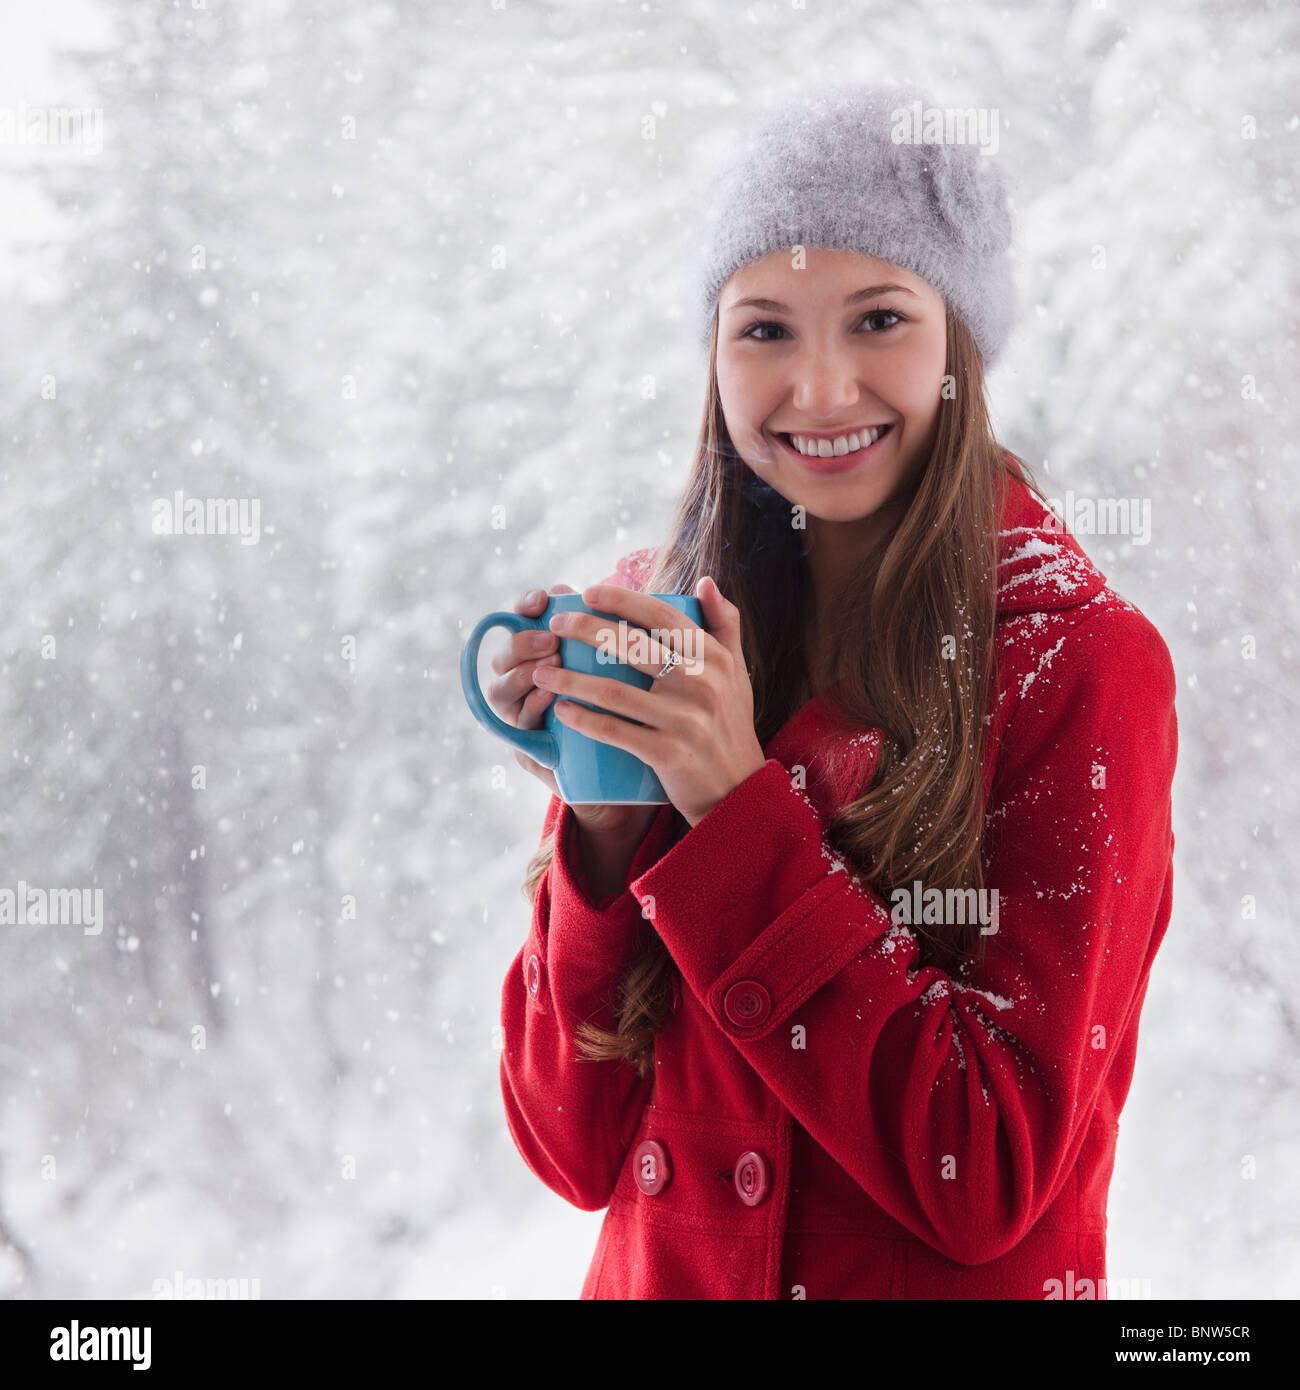 Woman in the snow holding a warm drink Stock Photo